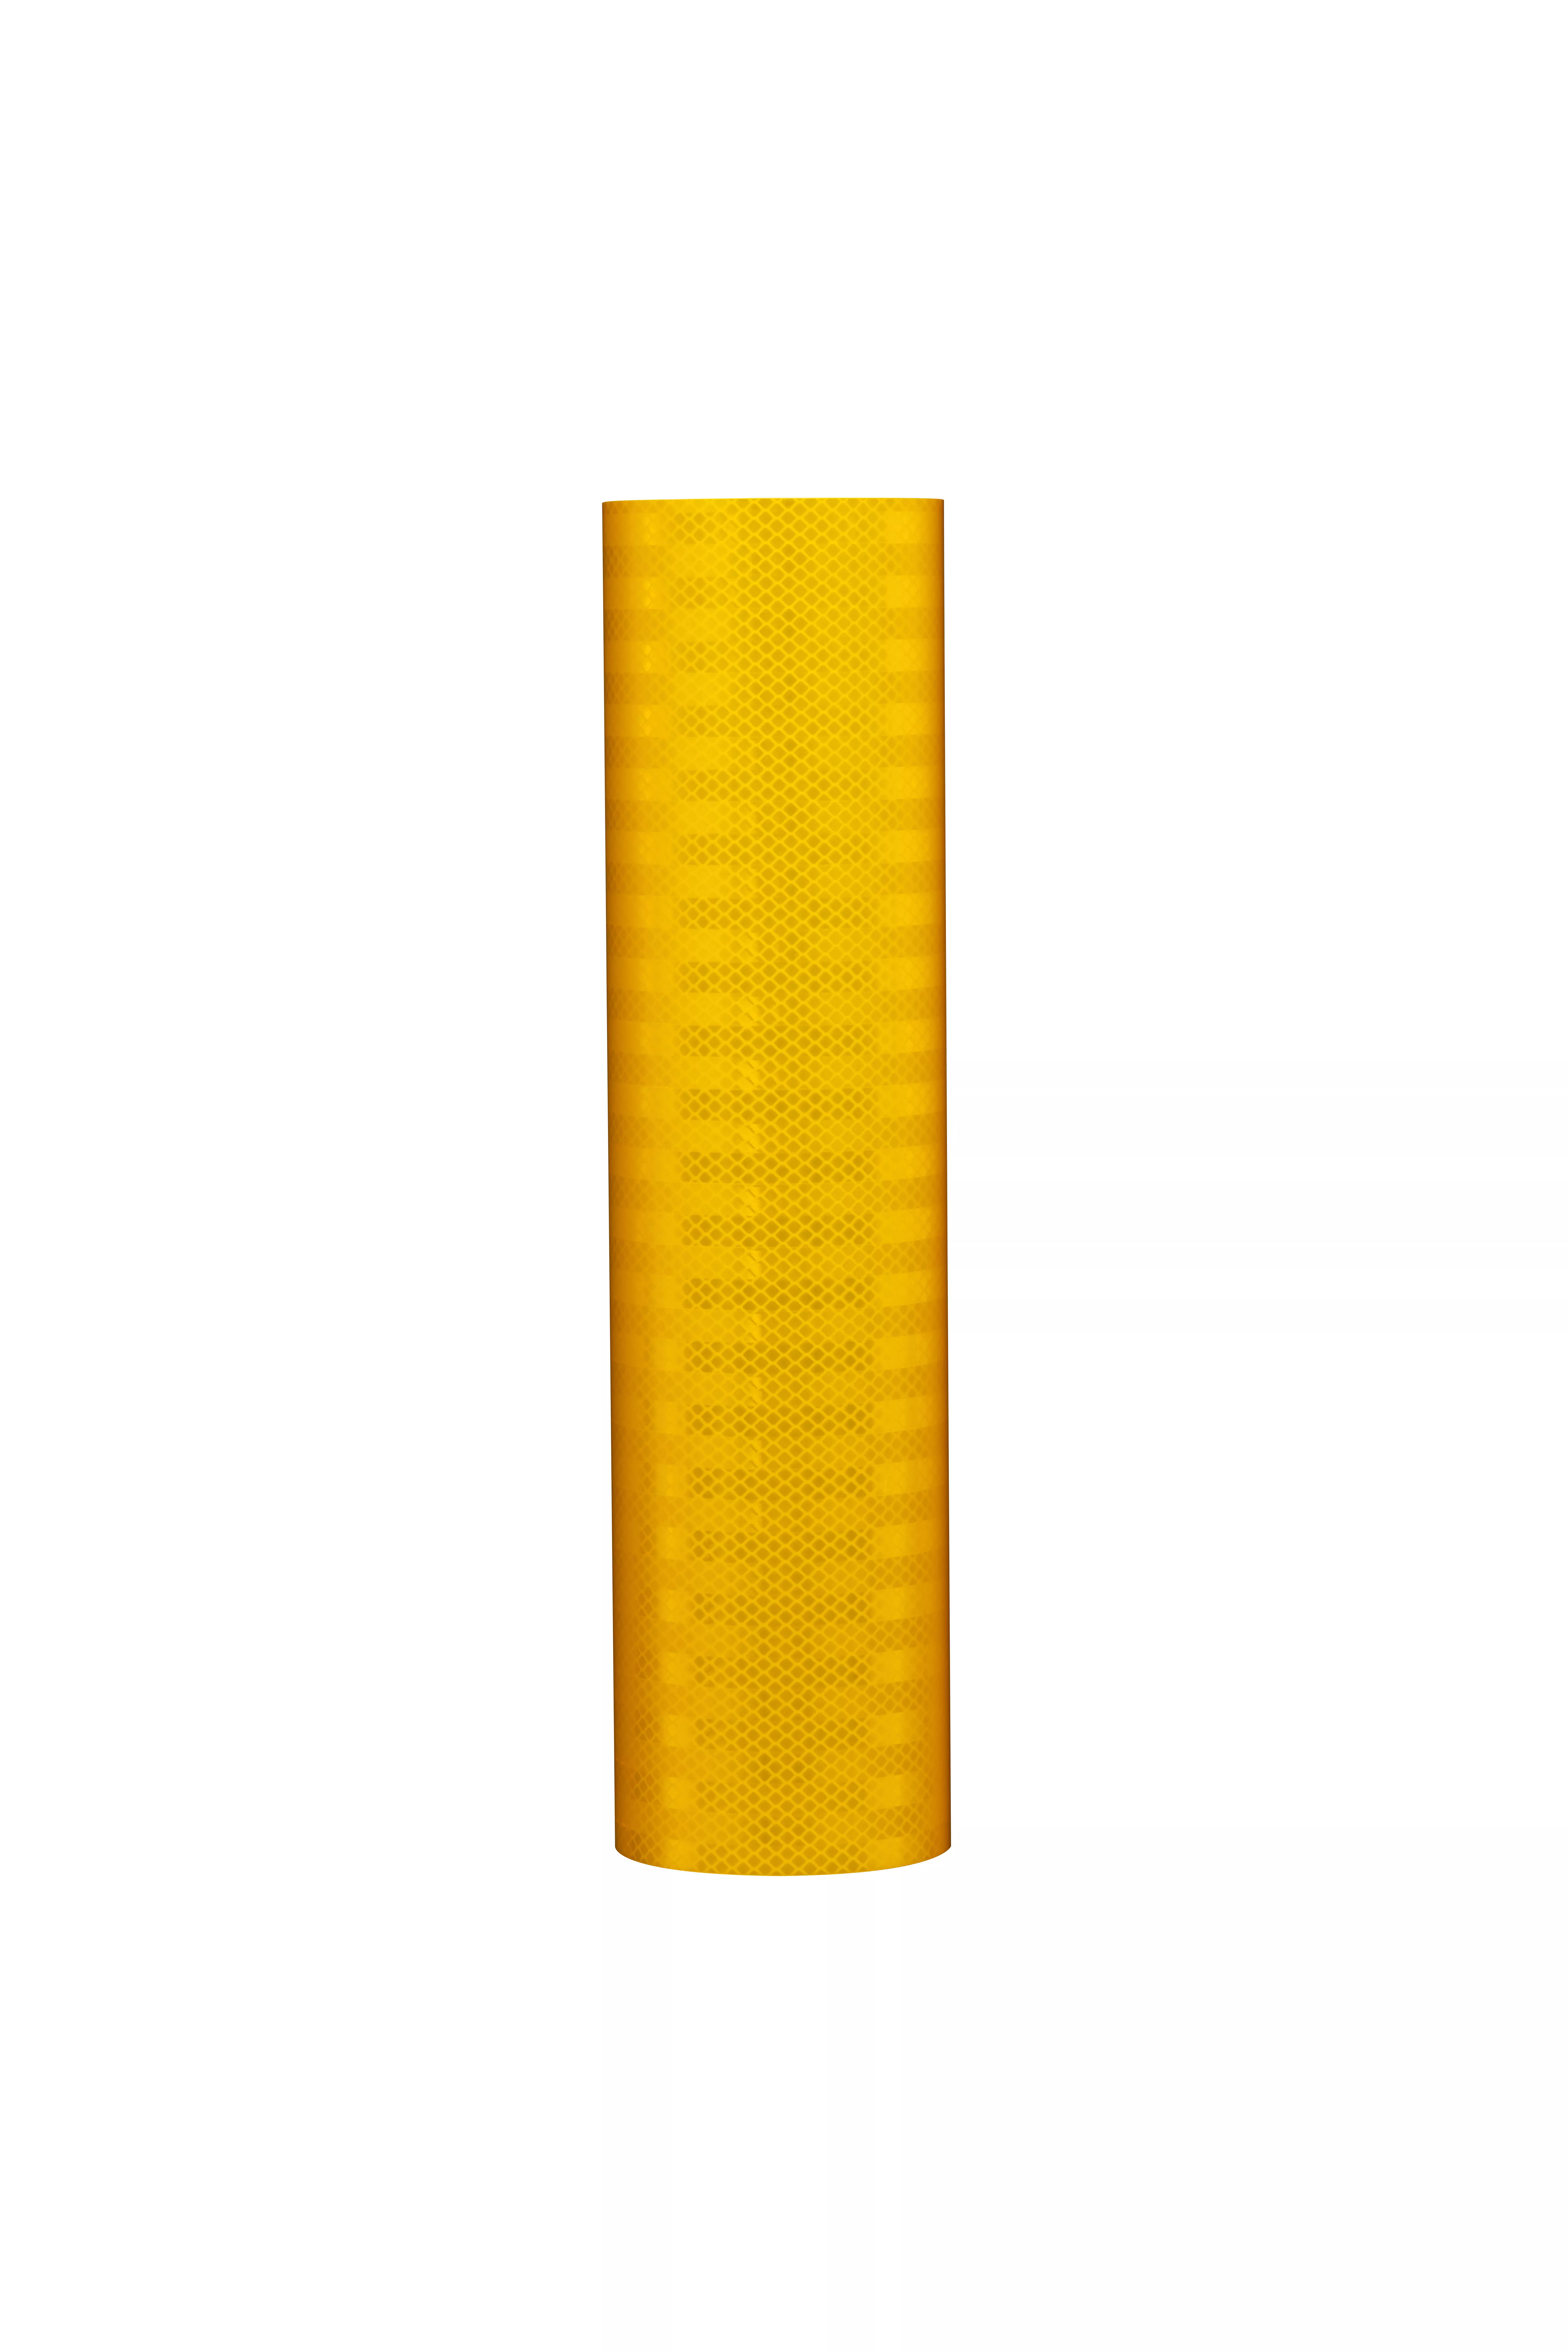 3M™ Flexible Prismatic Reflective Sheeting 3311 Yellow, 3 in X 50 yd, 1
Roll/Case